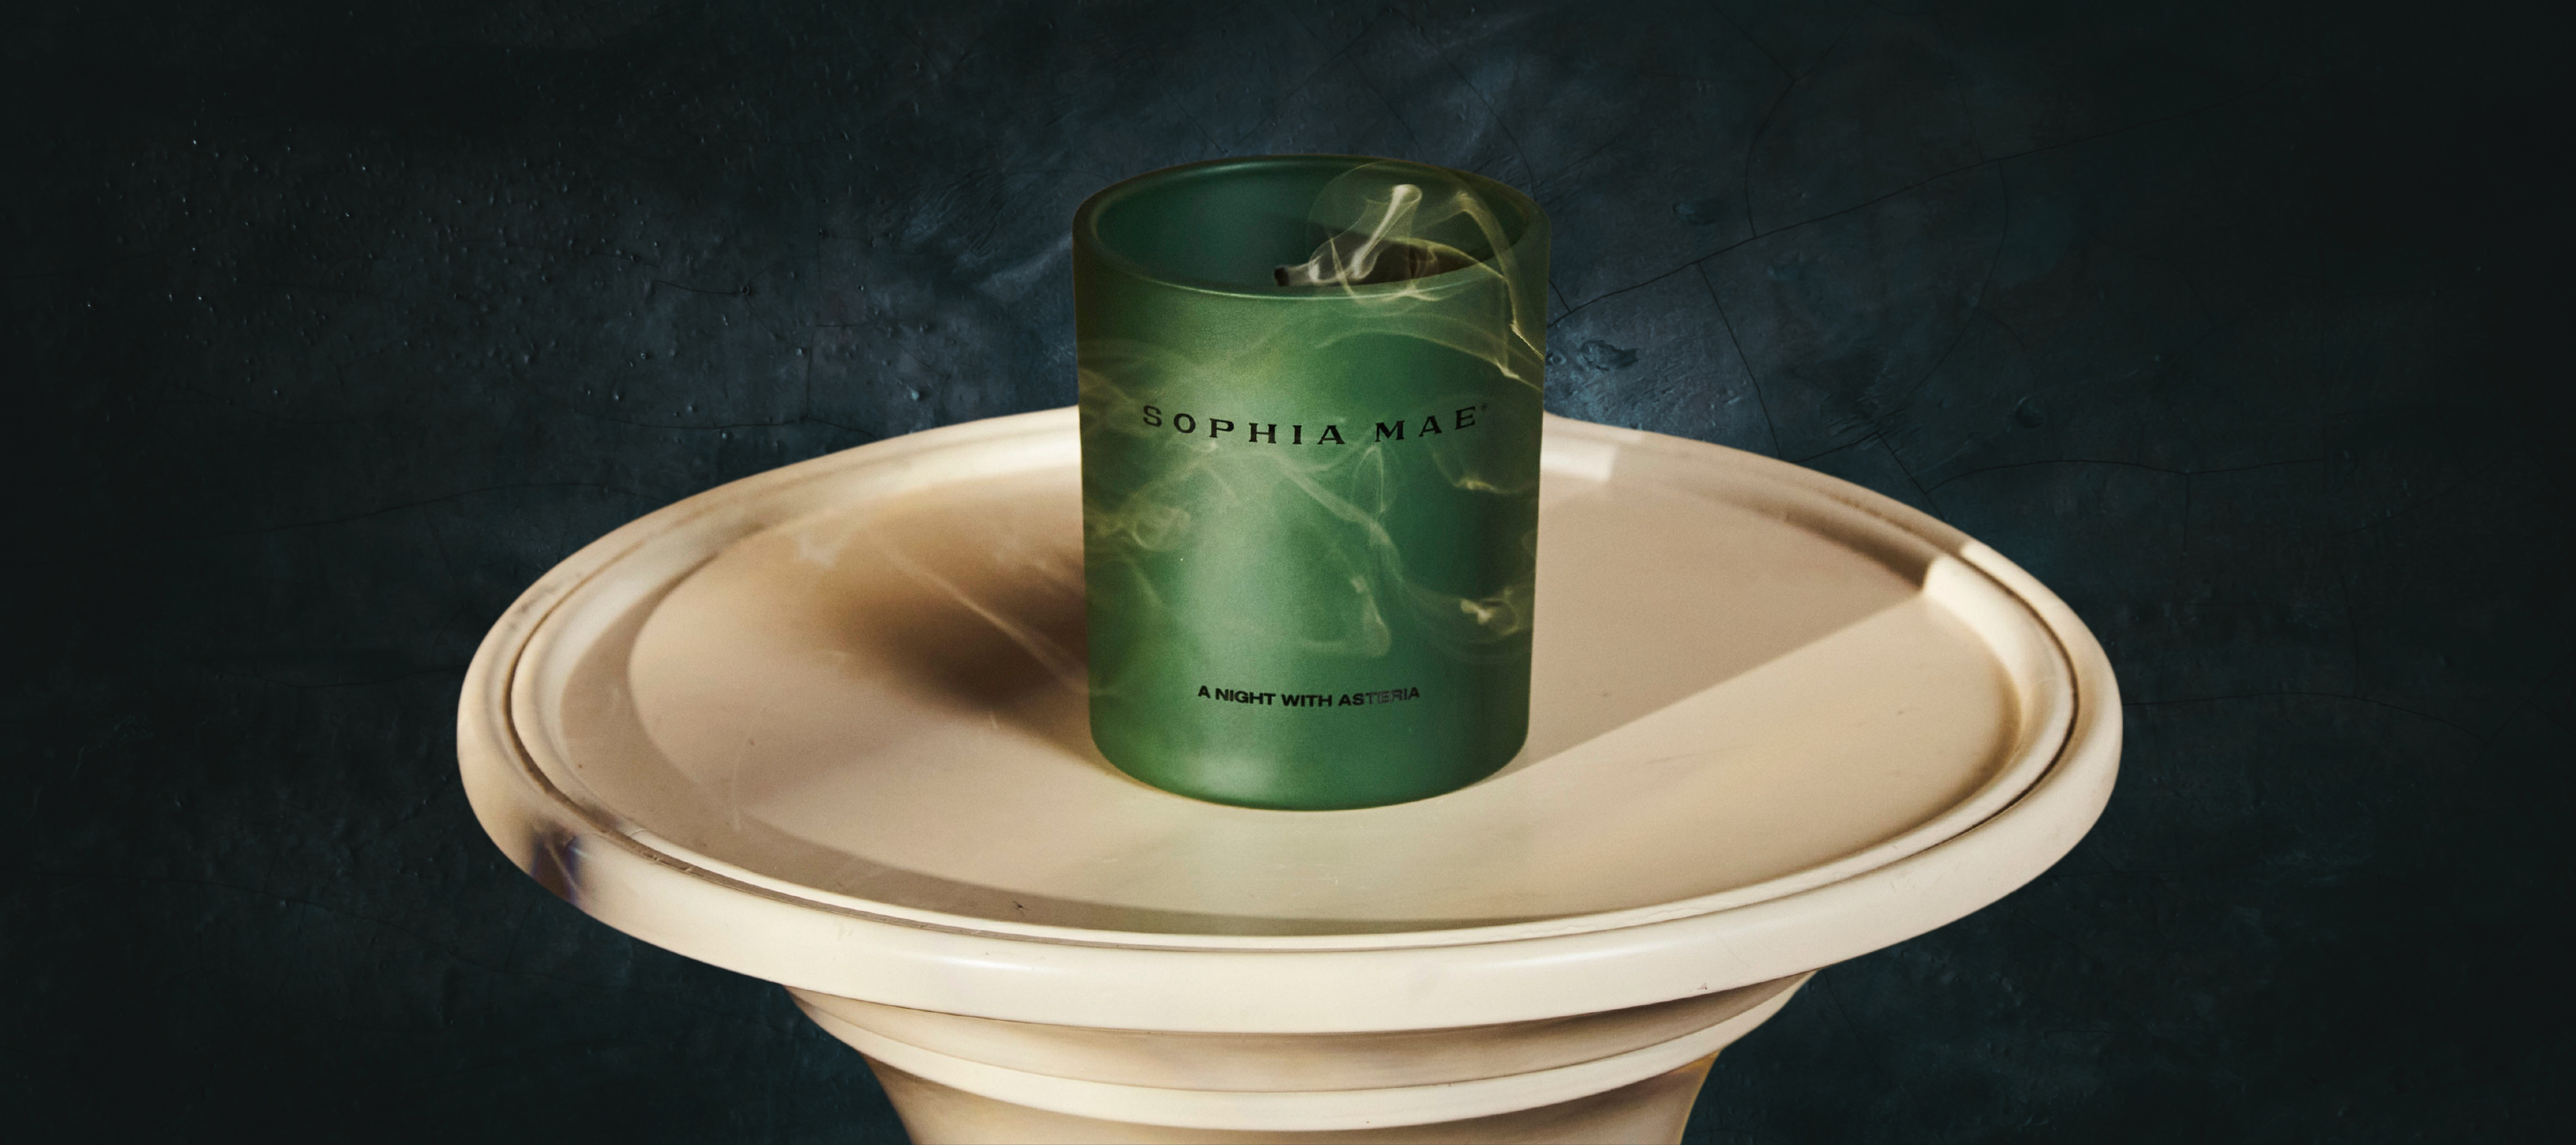 Limited edition candle SOPHIA MAE by Monica Geuze